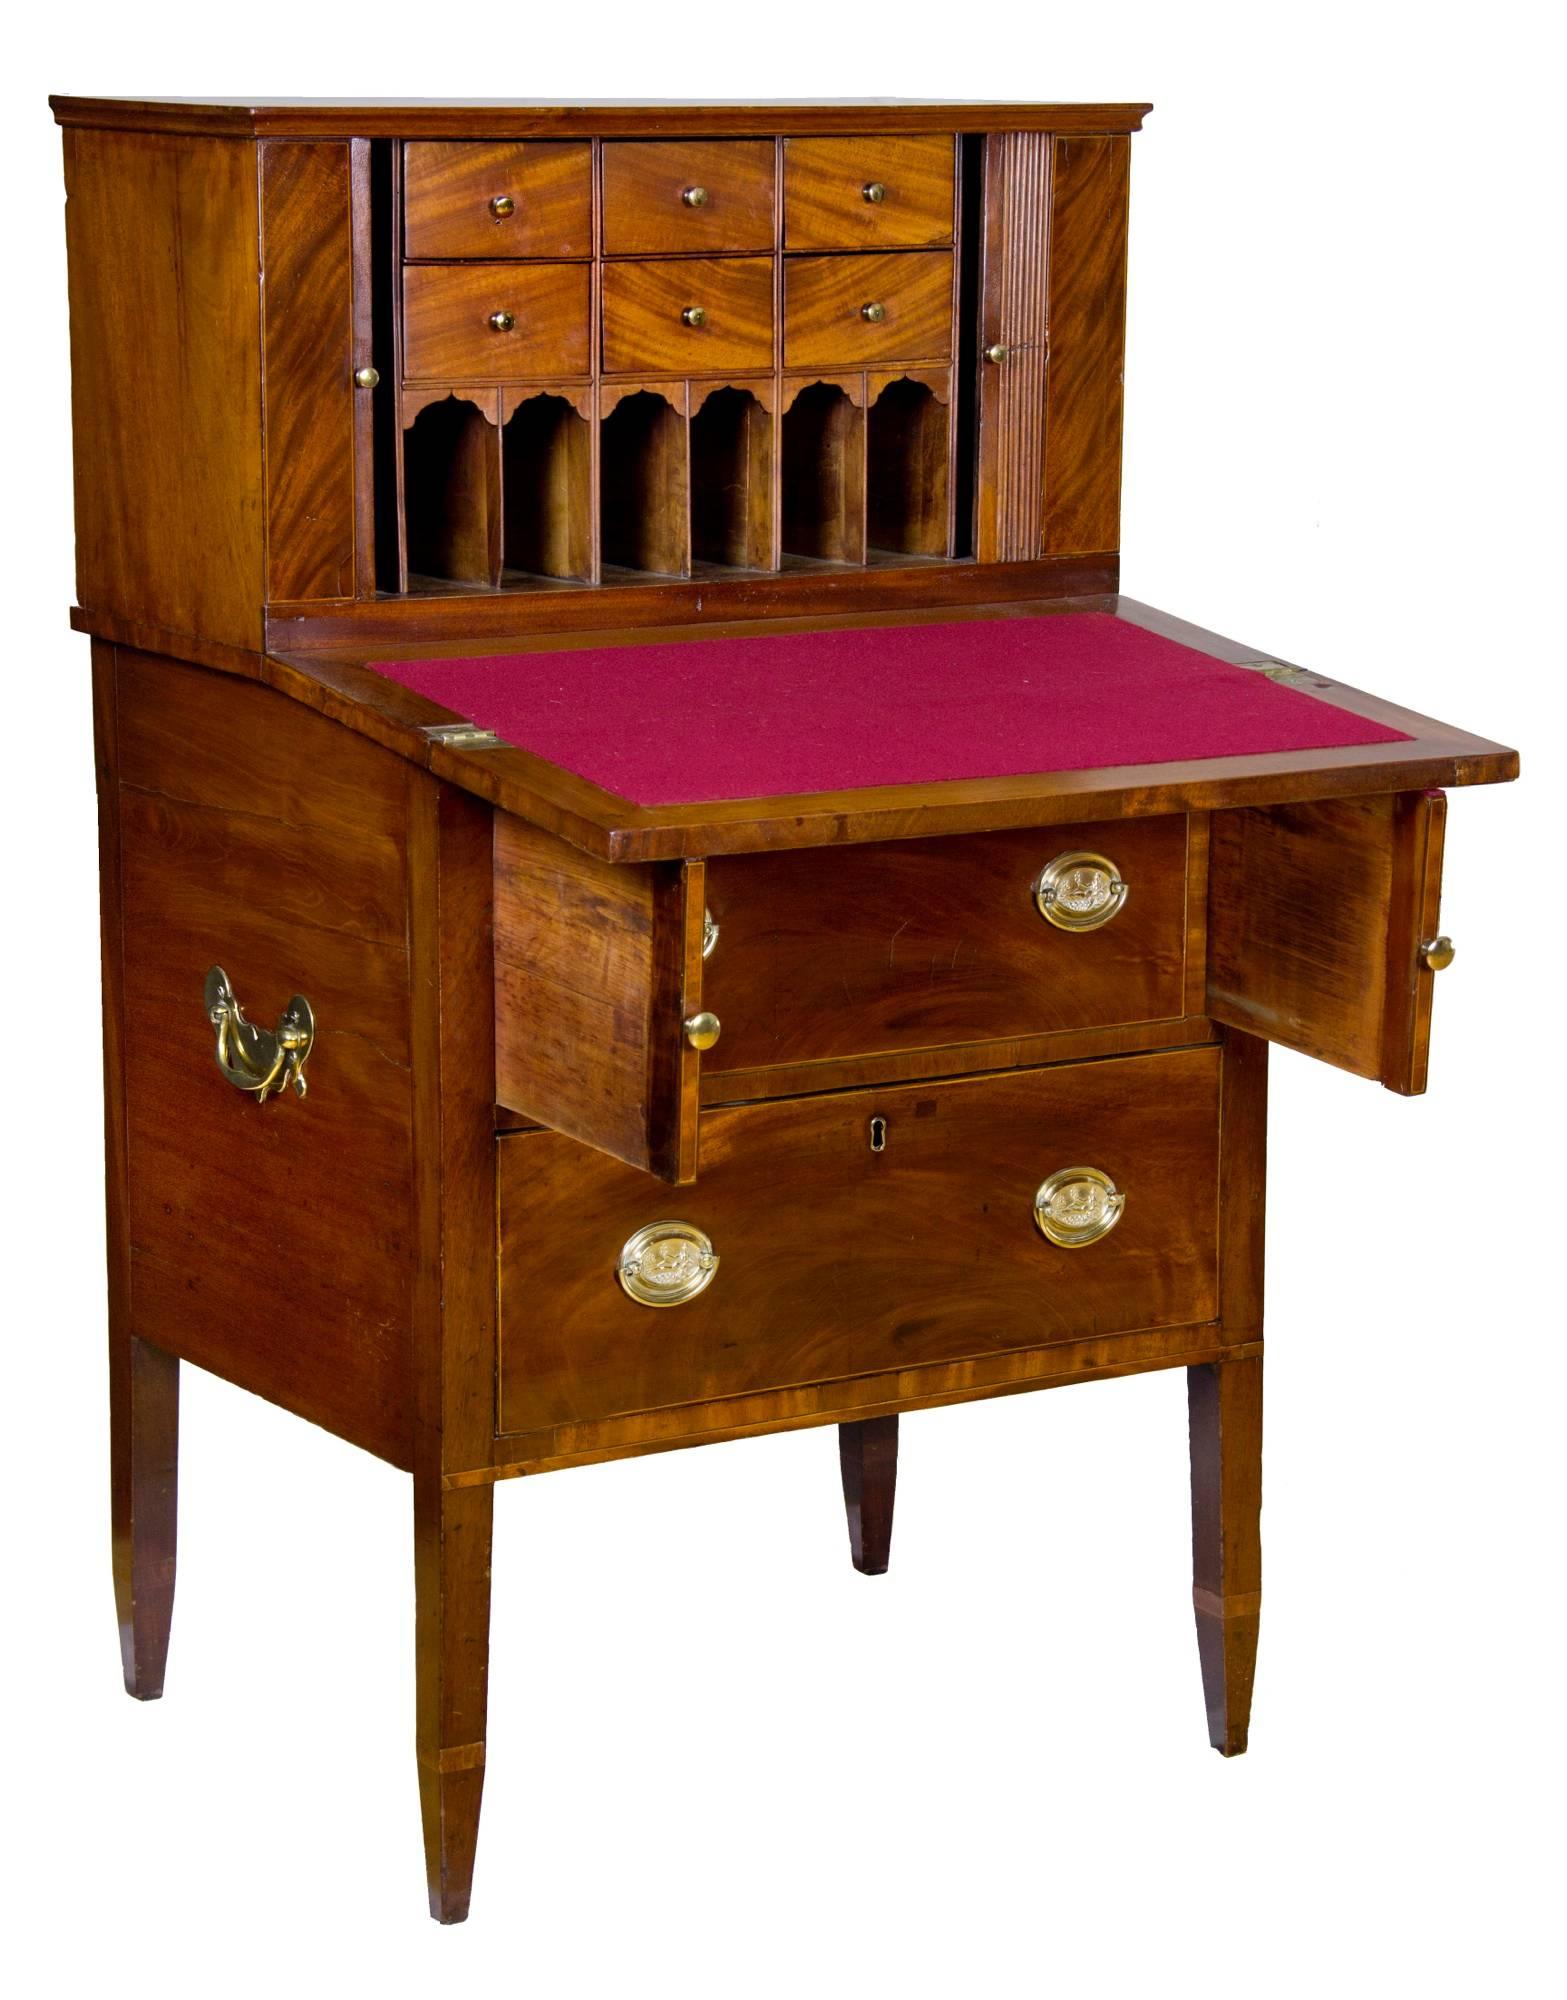 It is most rare to find a desk of this size; it was obviously a custom order. This came out of the inventory of a major Connecticut dealer, John Walton, and is in superb condition, with no alterations or modifications whatsoever. It retains its